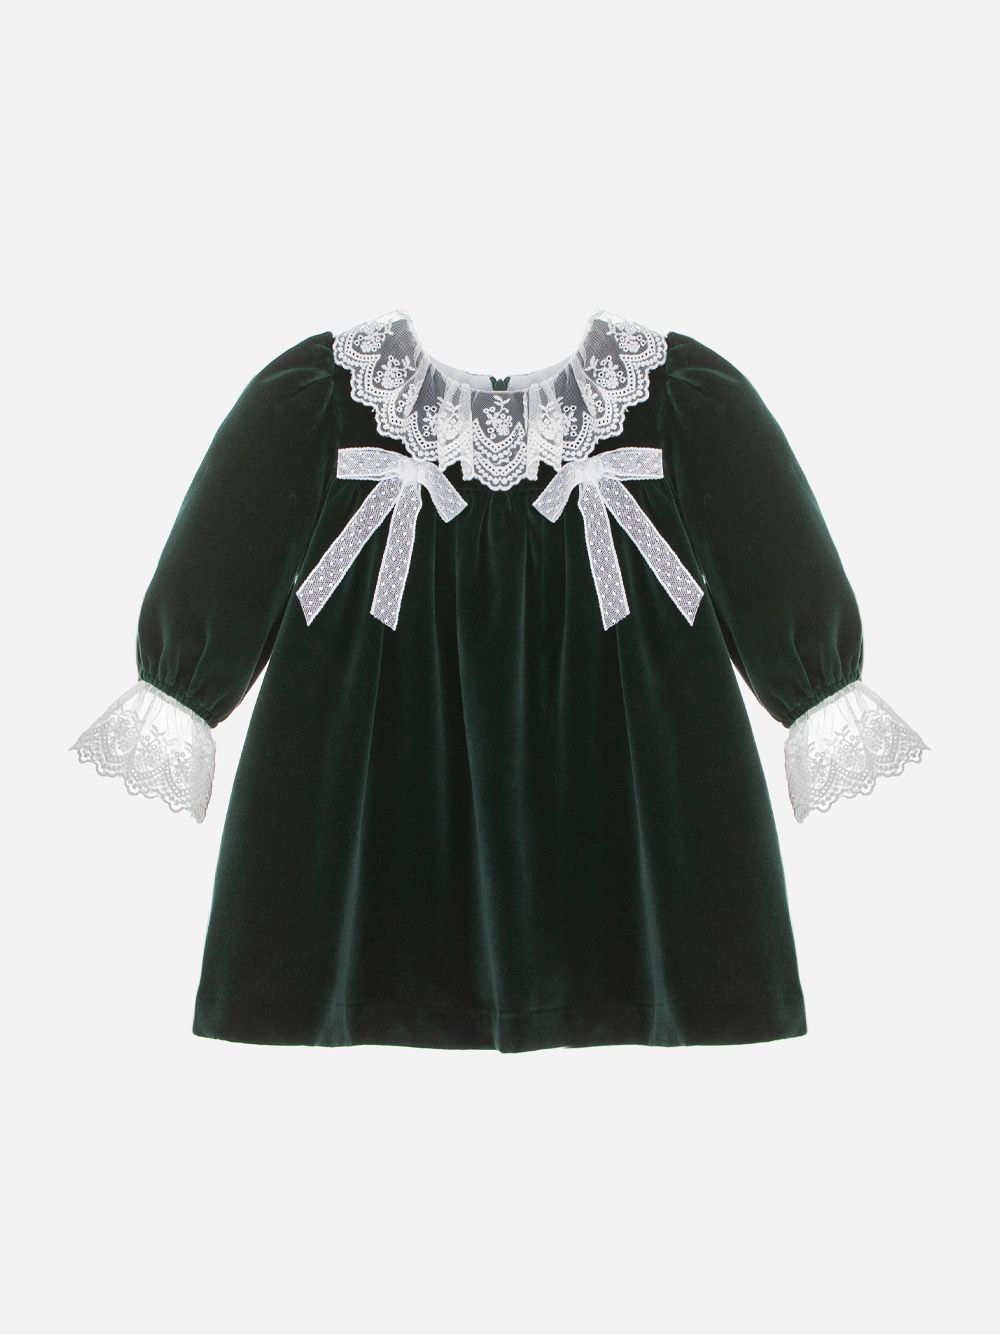 Green Velvet Dress with Lace Detail